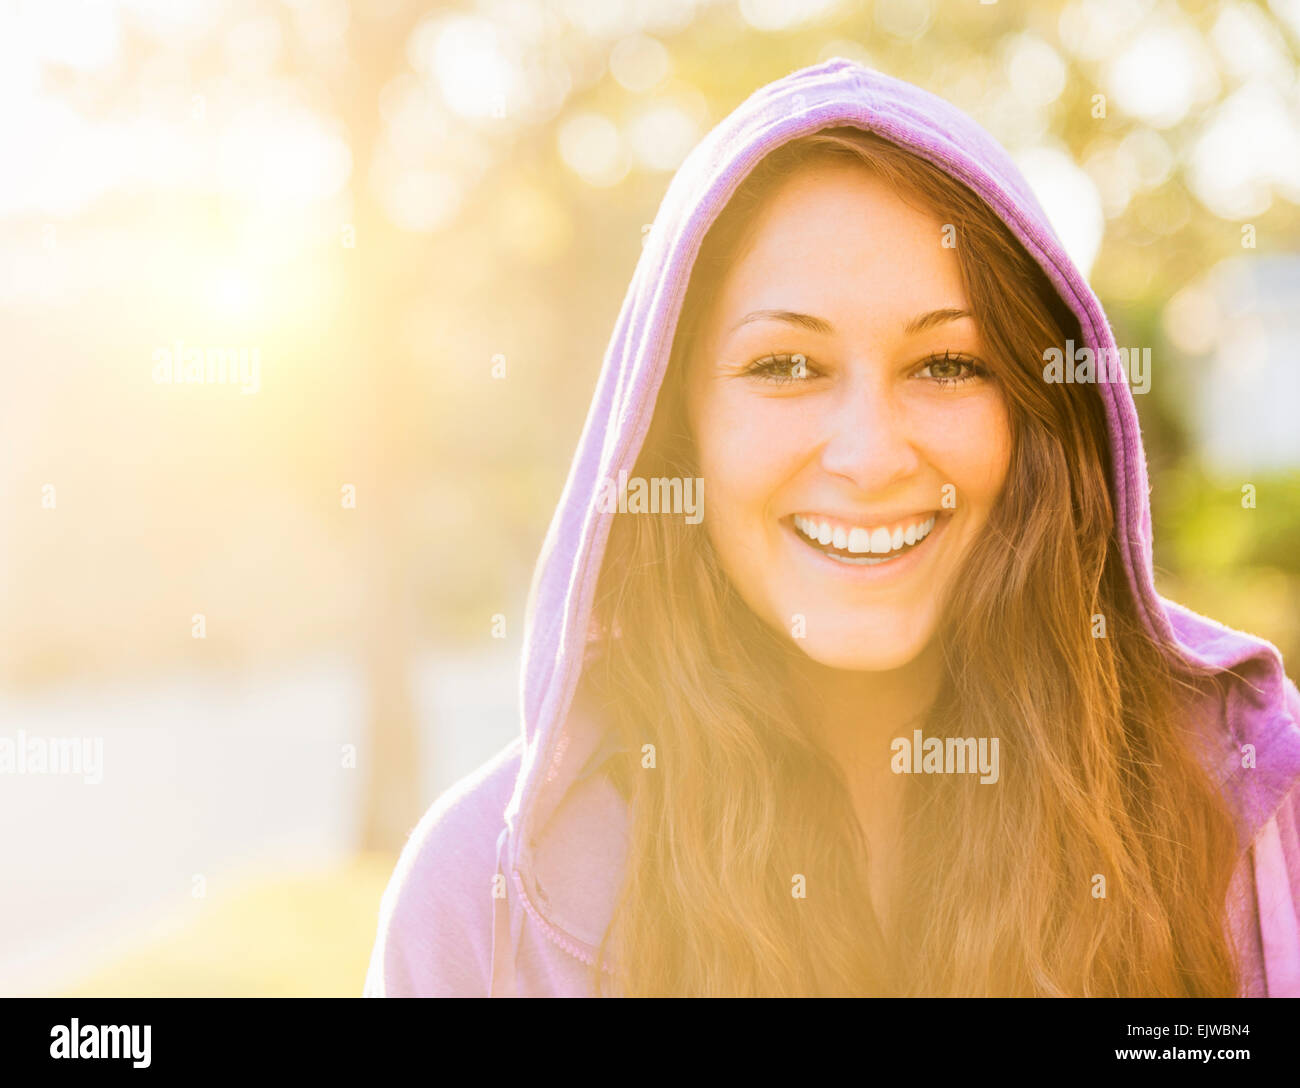 USA, Florida, Jupiter, Portrait of smiling woman in hoodie Stock Photo